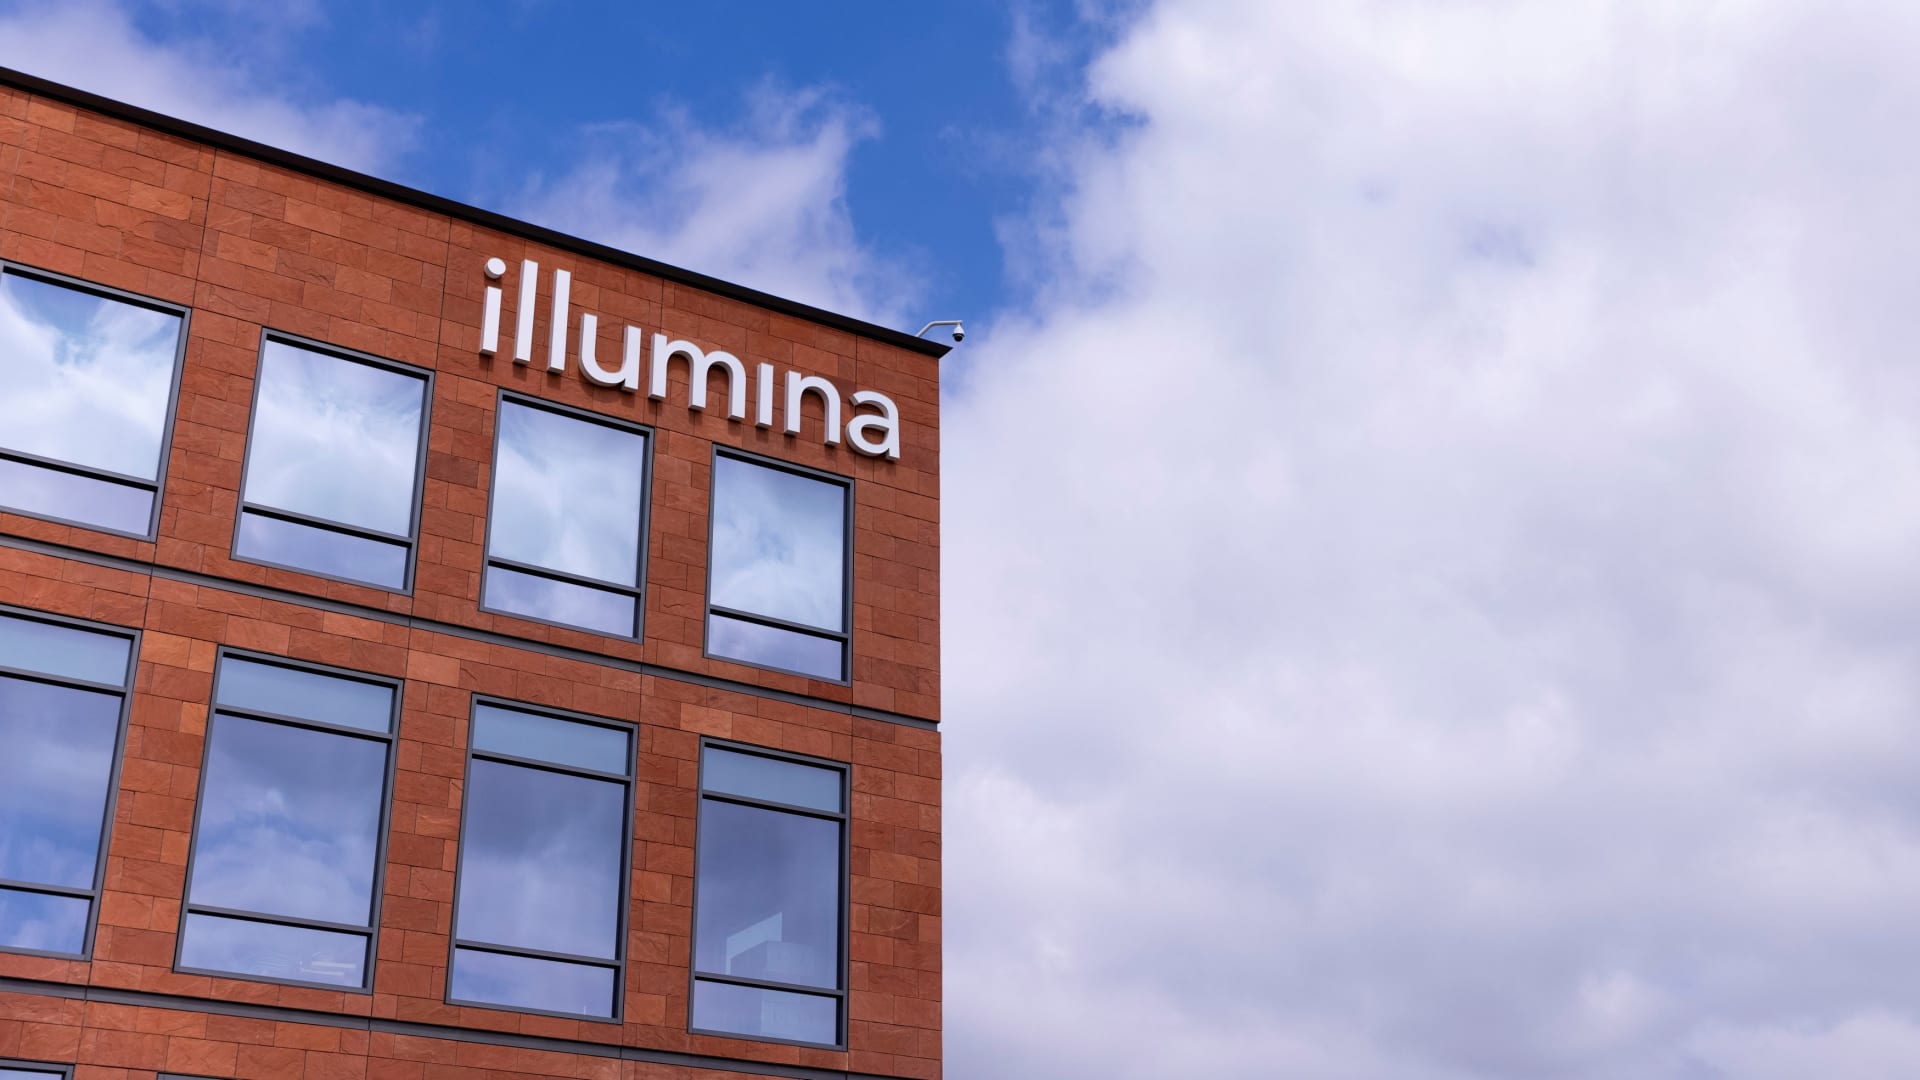 Illumina unveils plans to cut costs as it faces shrinking margins